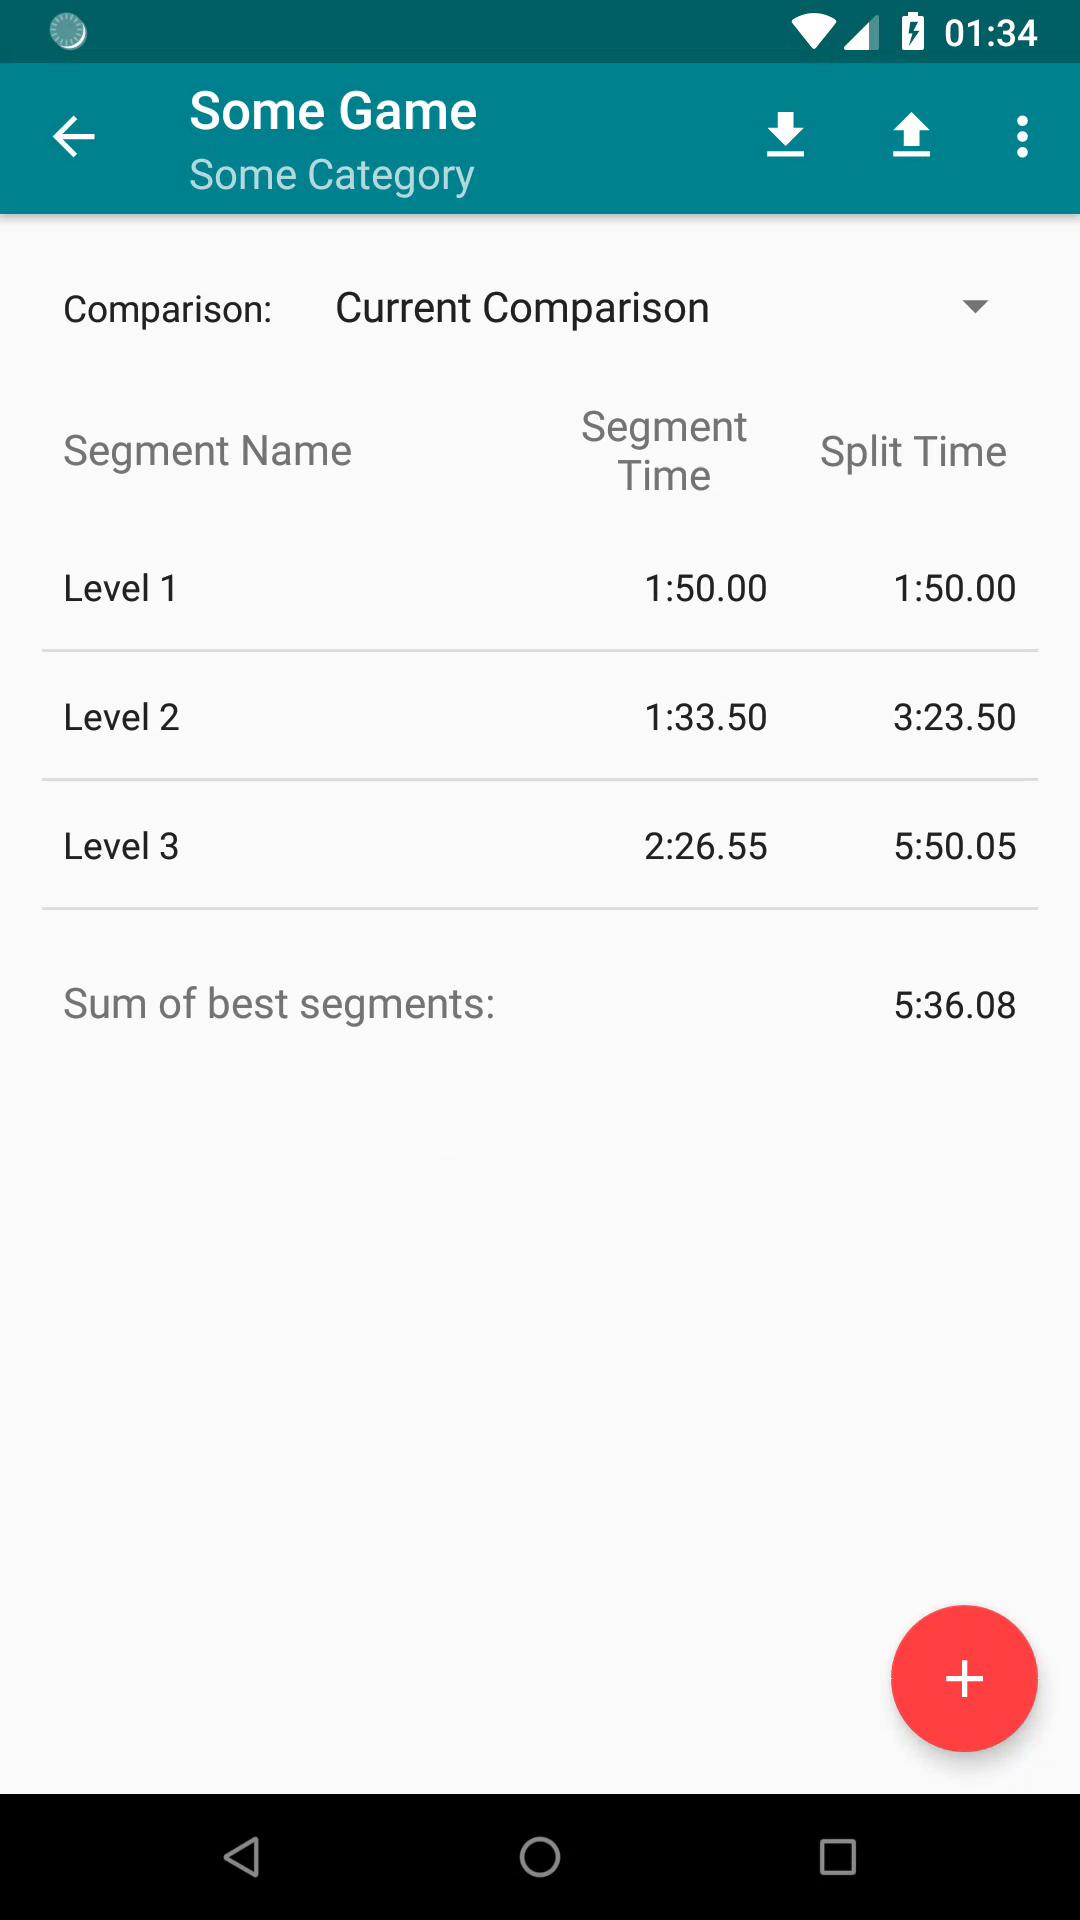 Floating Speedrun Timer for Android - Download